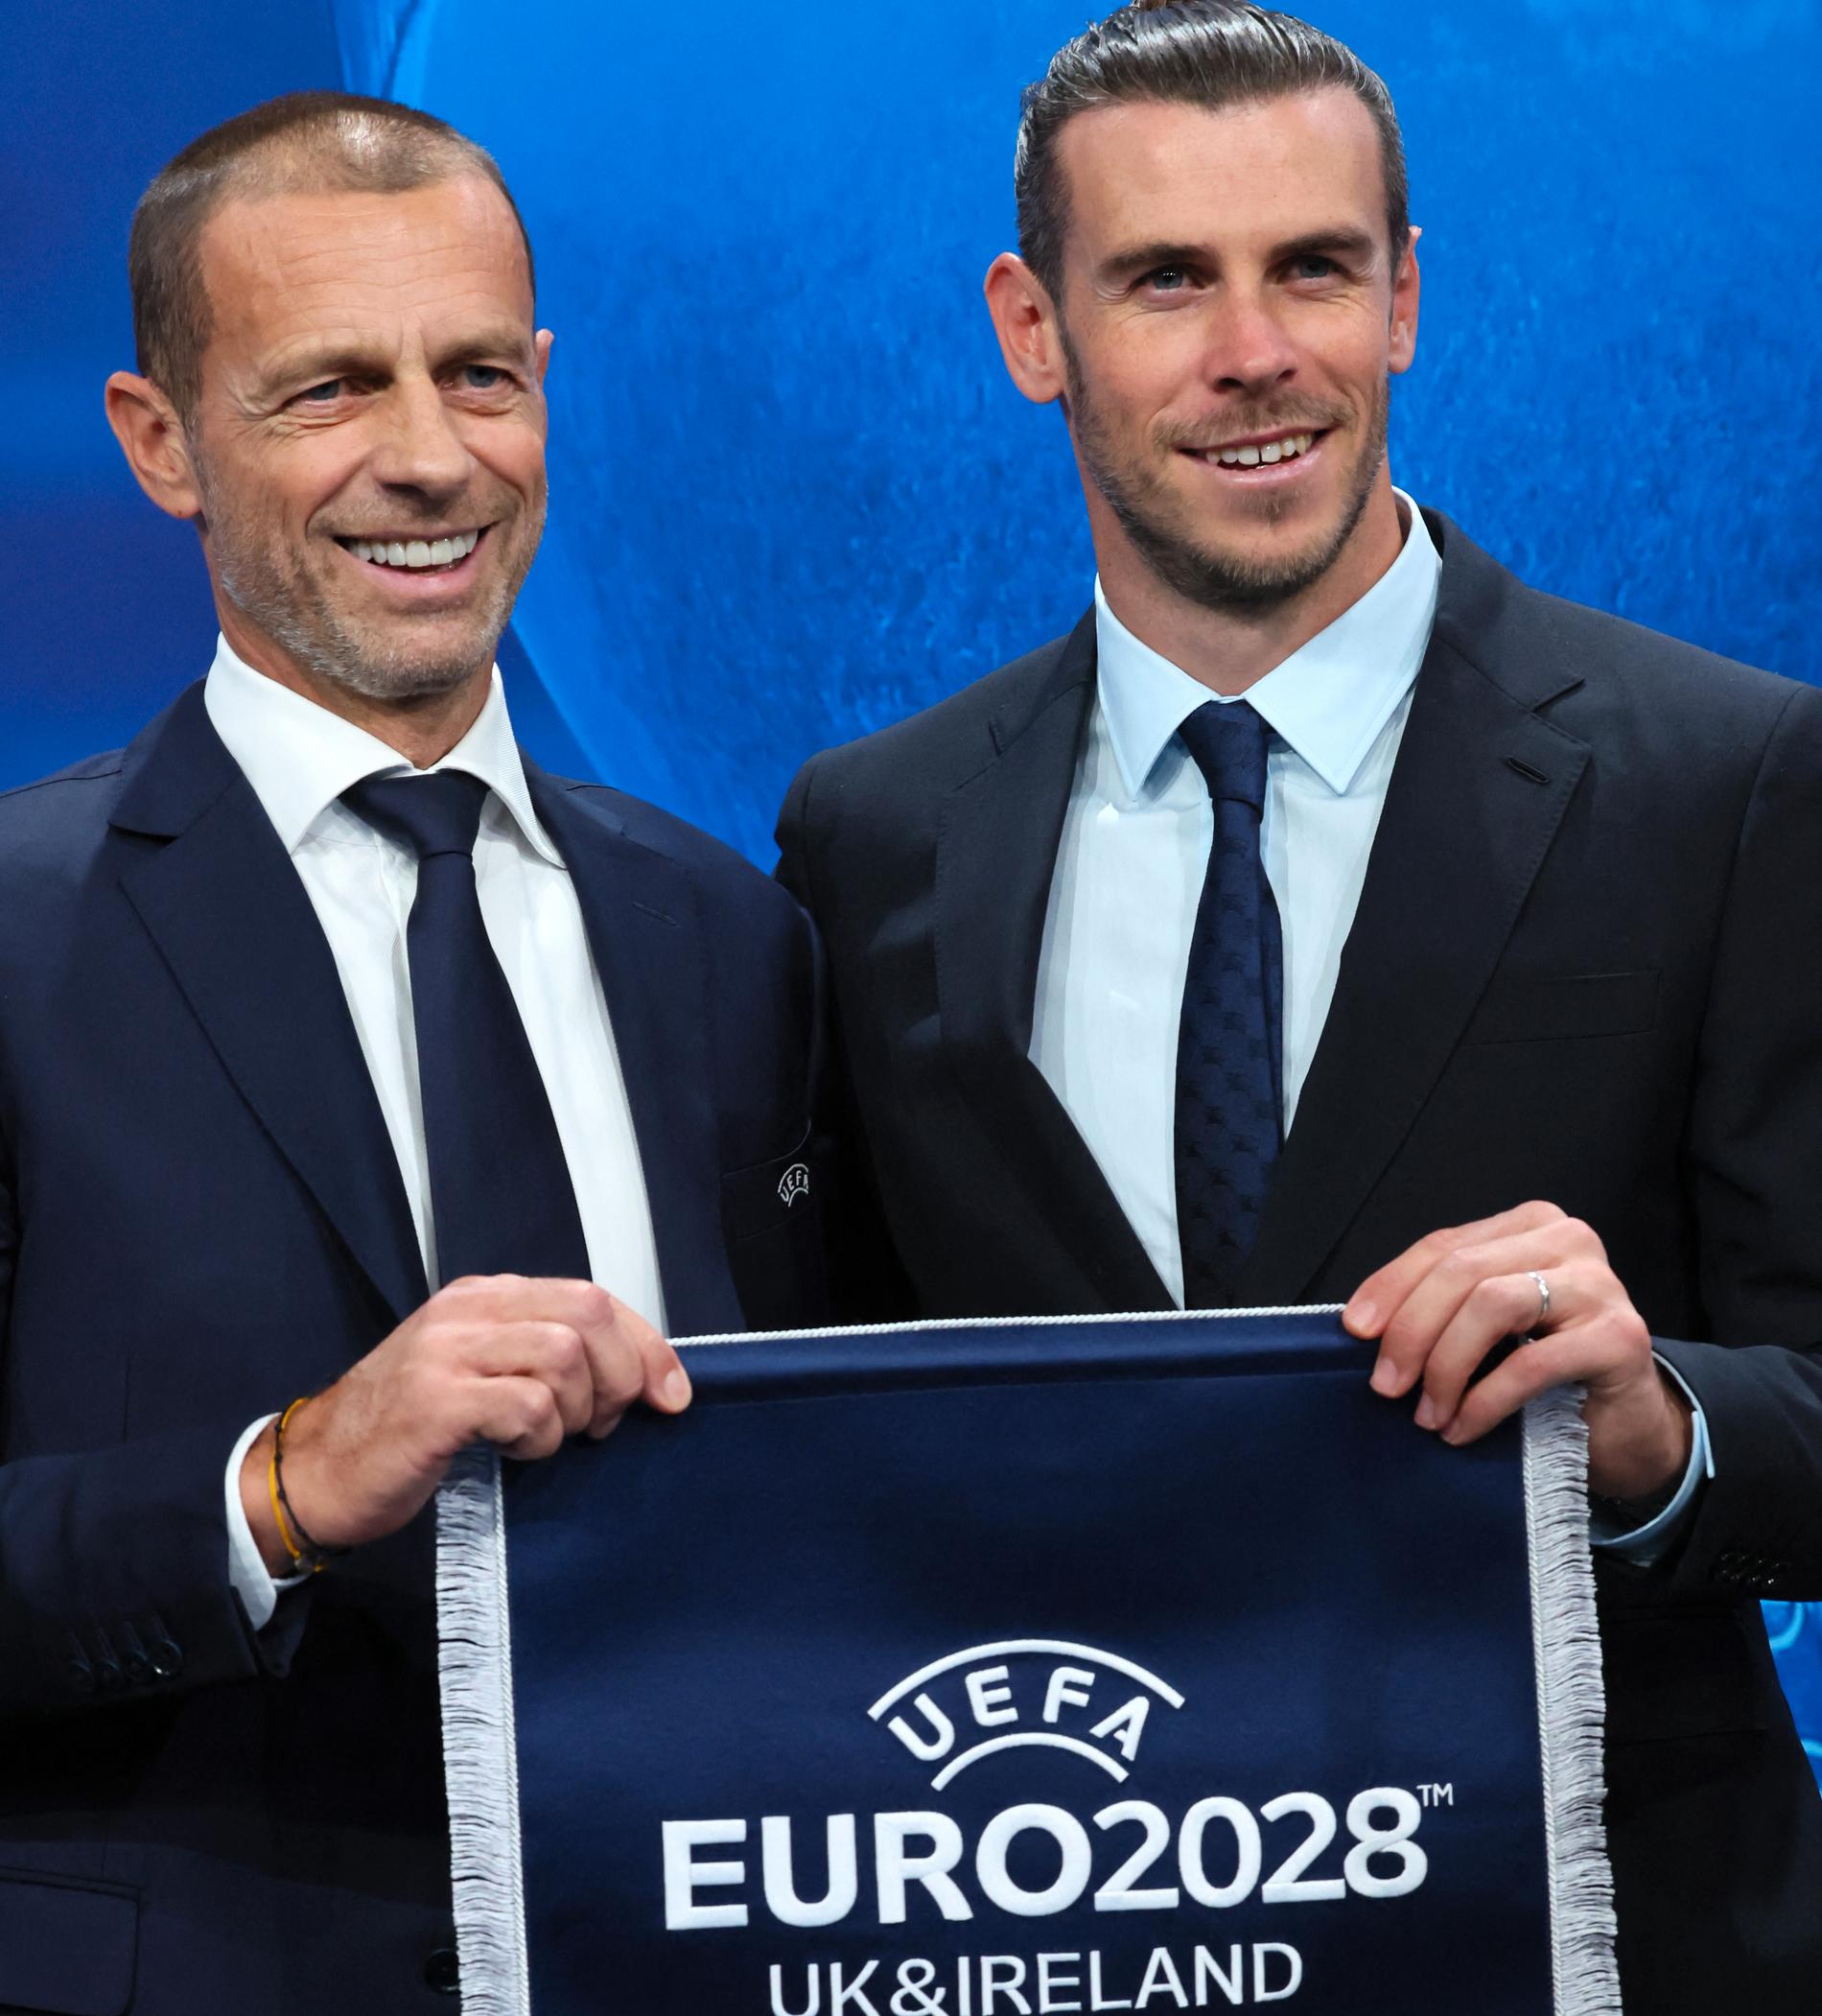 Aleksander Ceferin (TV) with Gareth Bale regarding Tuesday's decision to move the 2028 European Championship to Great Britain and Ireland.